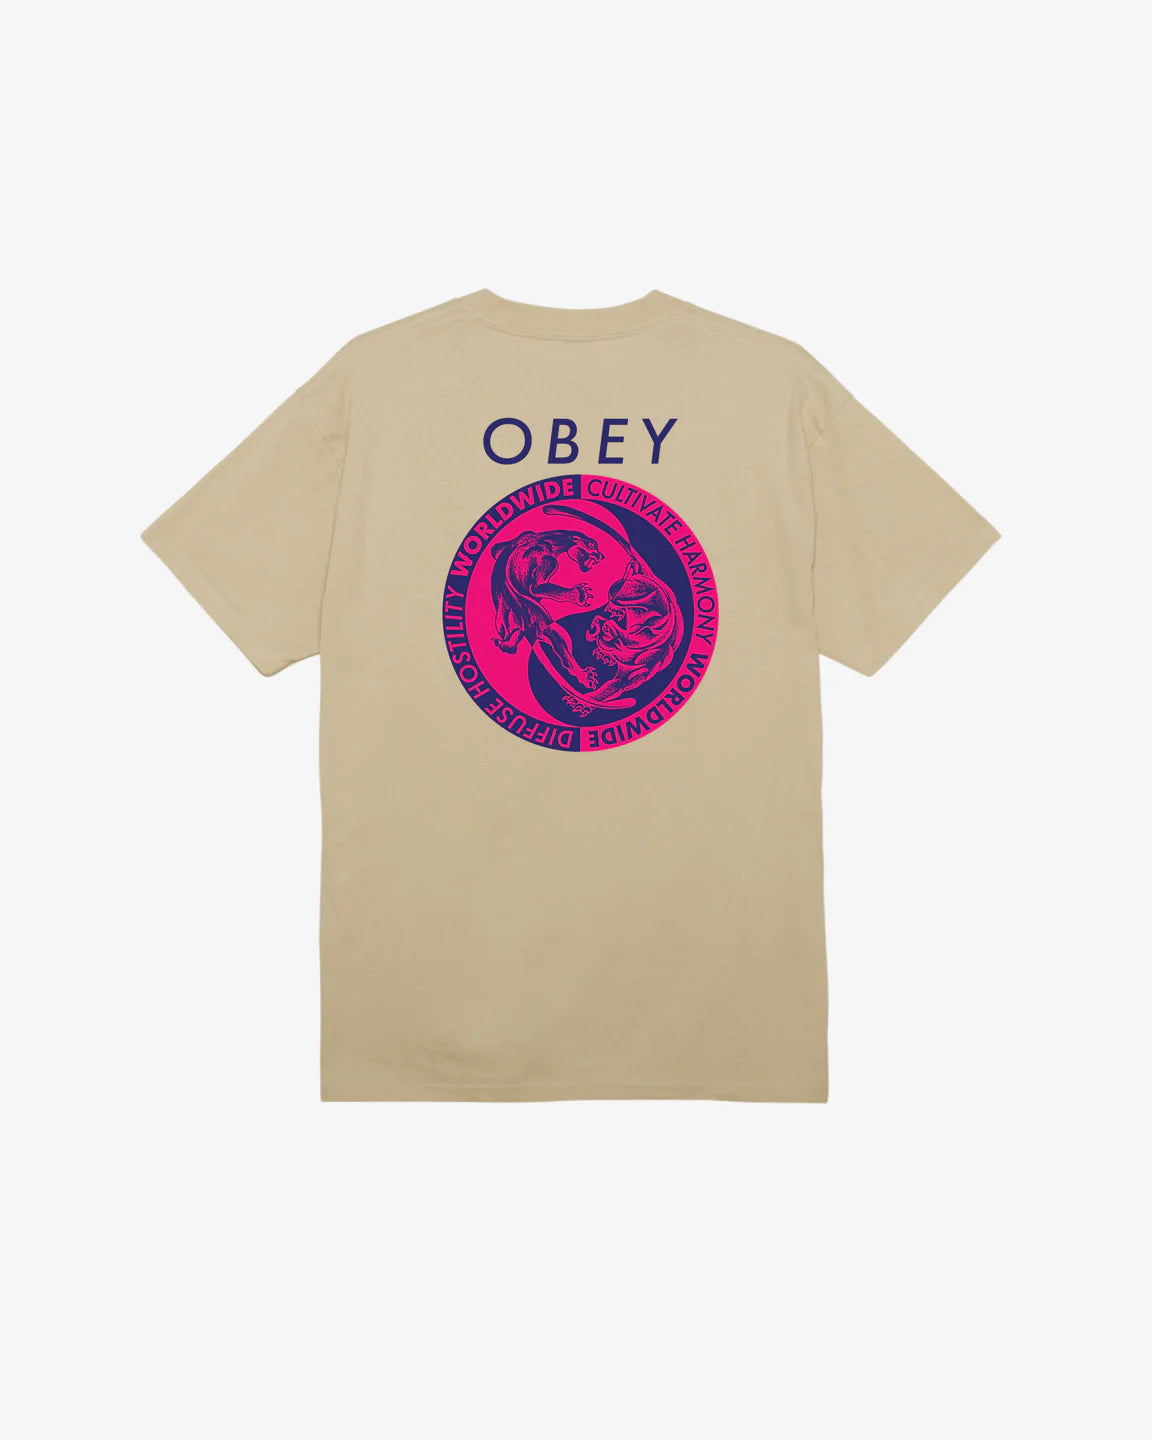 OBEY Ying Yang Panthers T-Shirt Sand Men's Short Sleeve T-Shirts Obey 